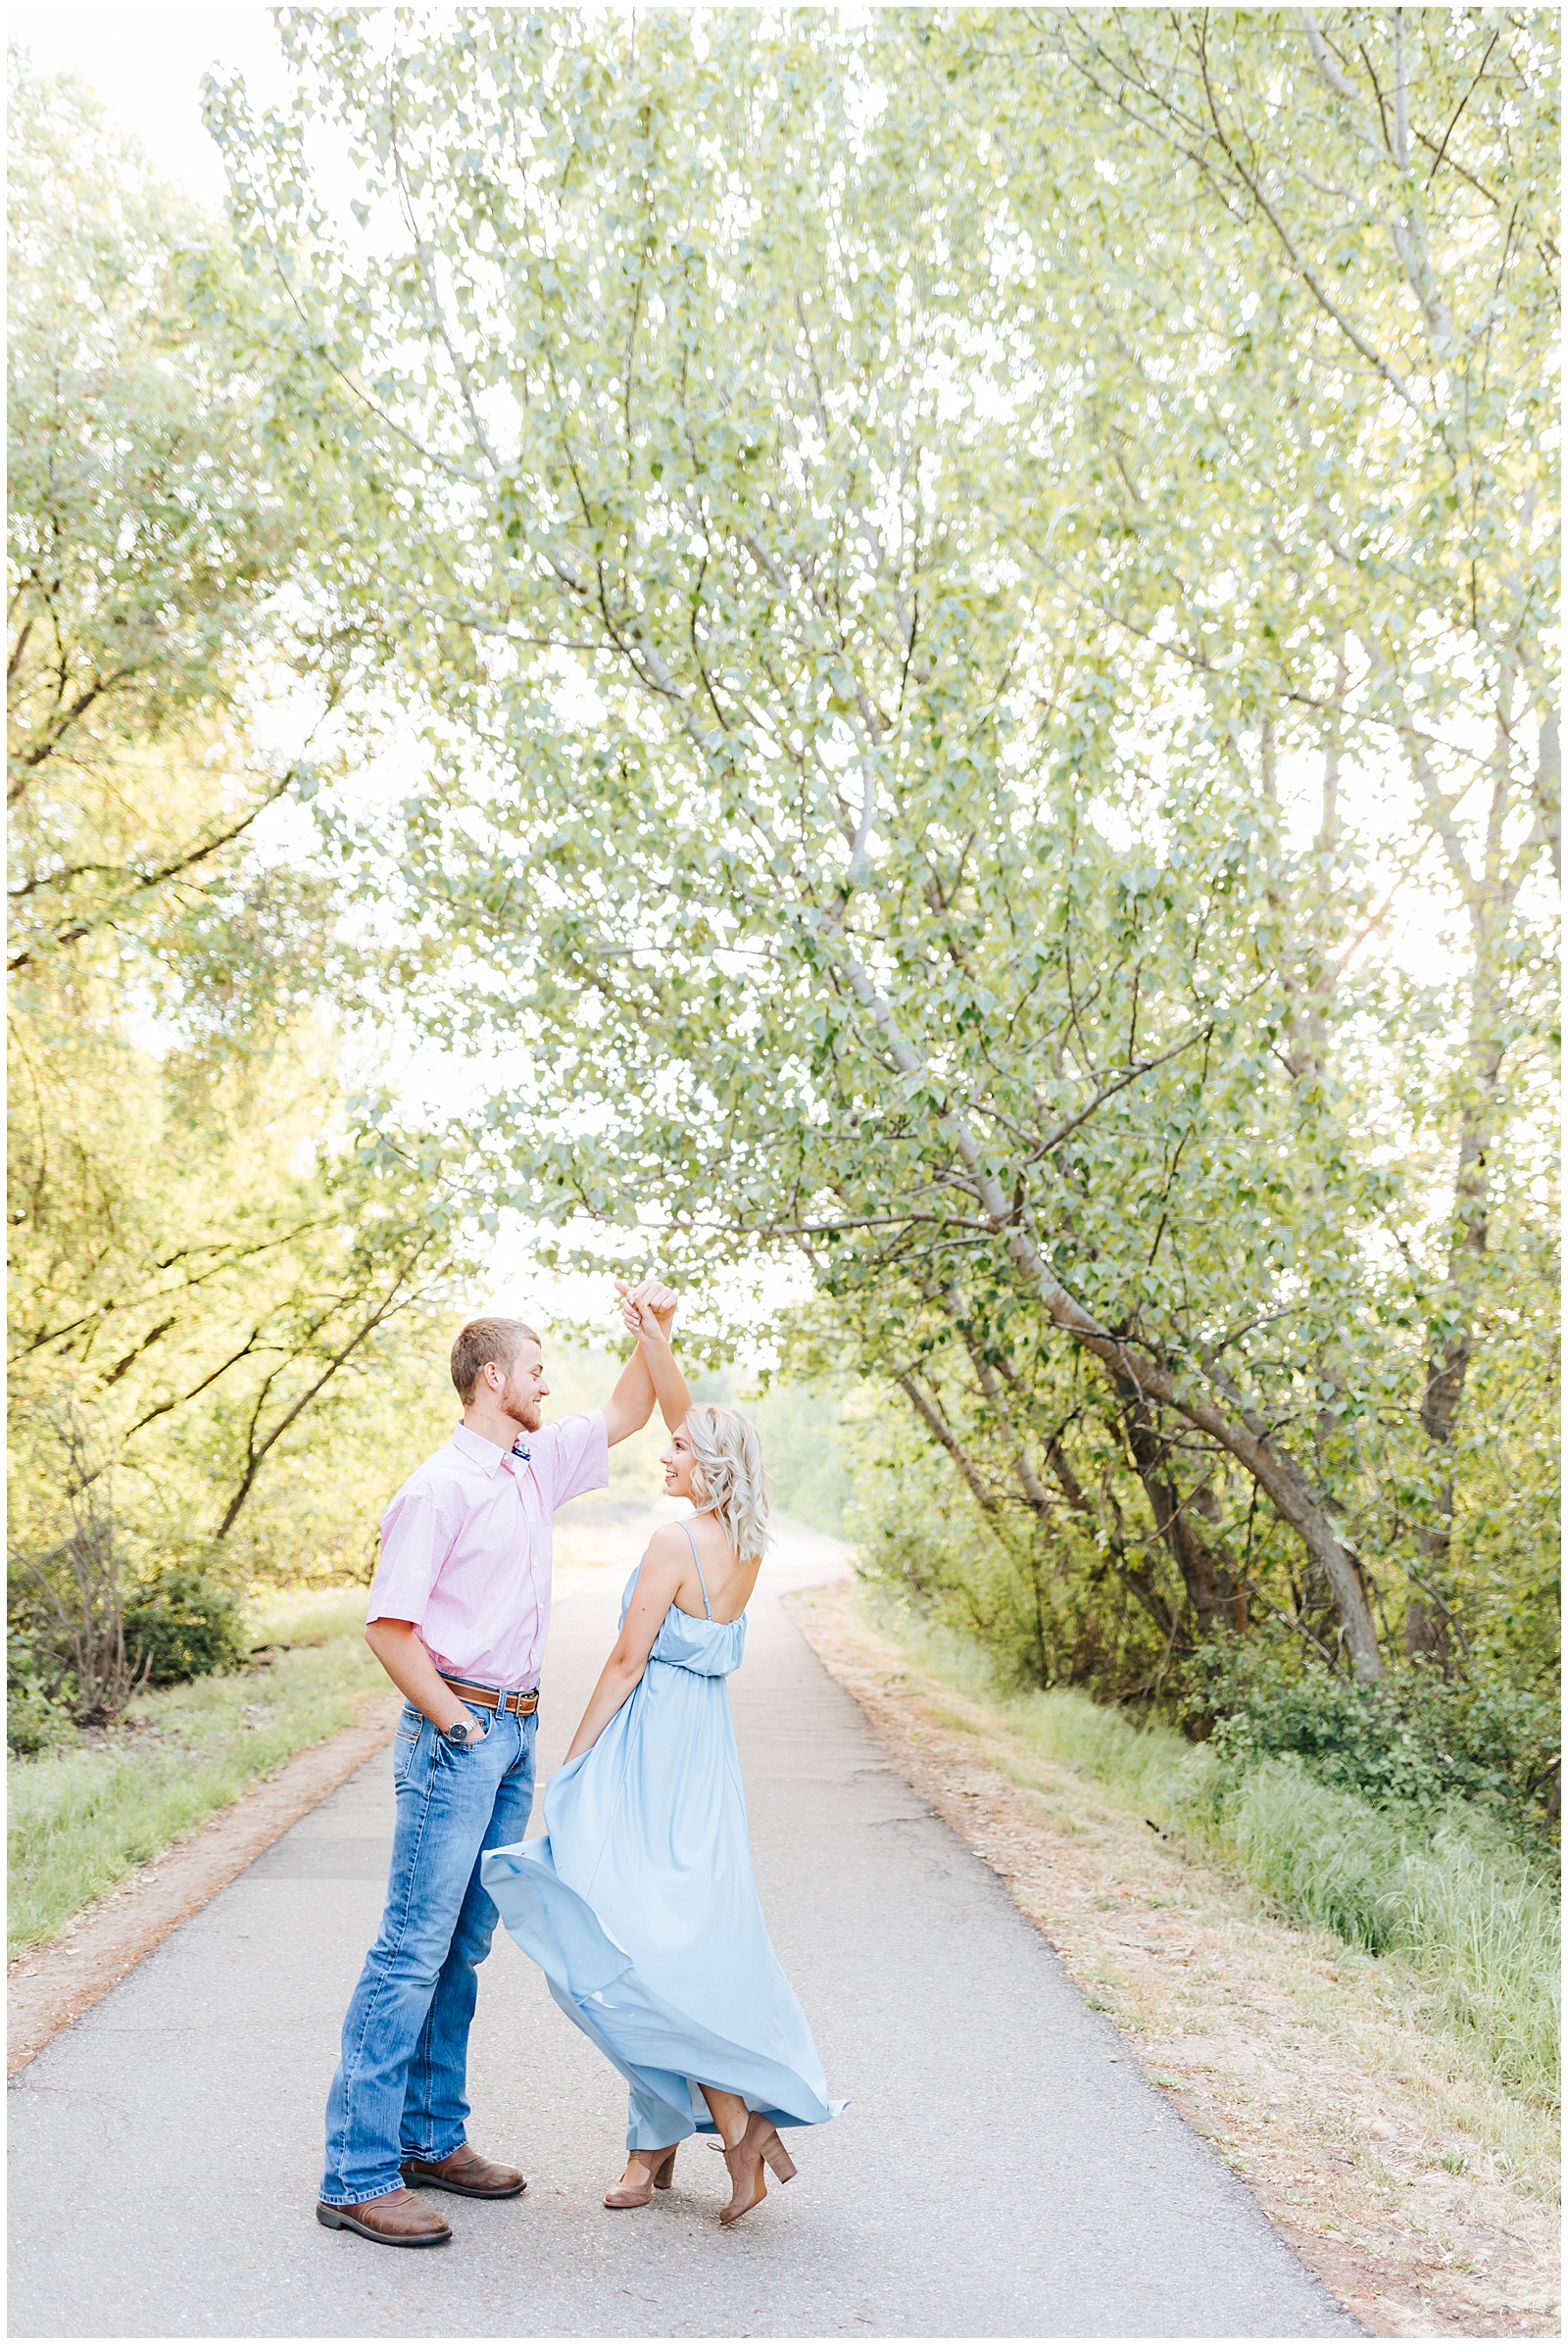 Boise River Spring Engagement Twirling in Dusty Blue Dress